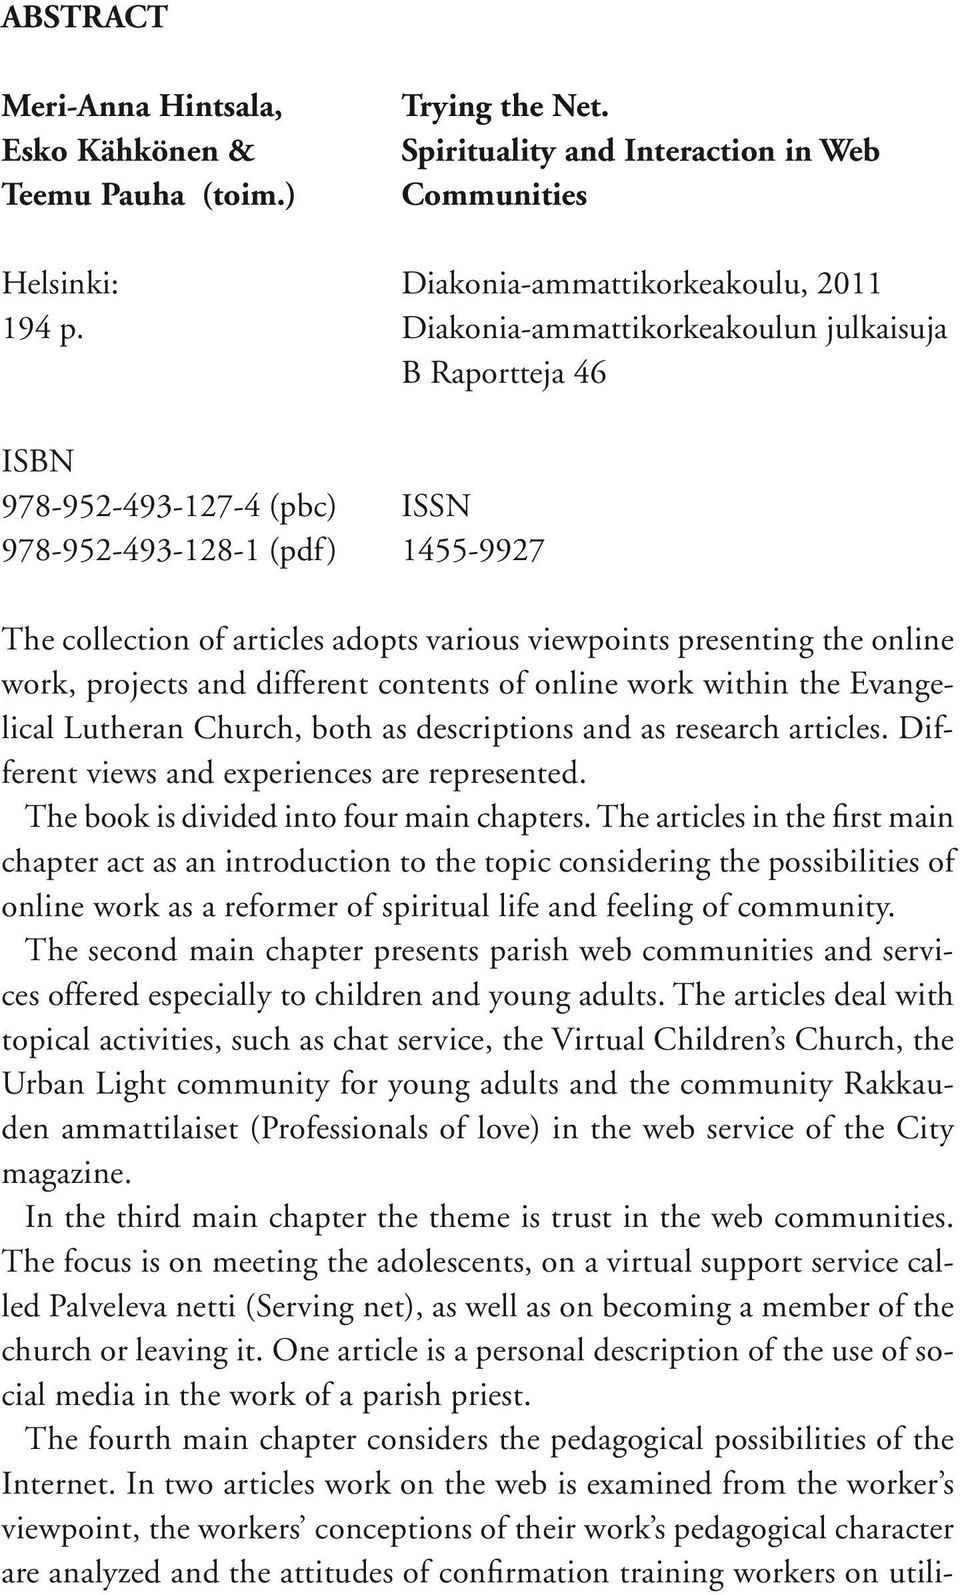 work, projects and different contents of online work within the Evangelical Lutheran Church, both as descriptions and as research articles. Different views and experiences are represented.